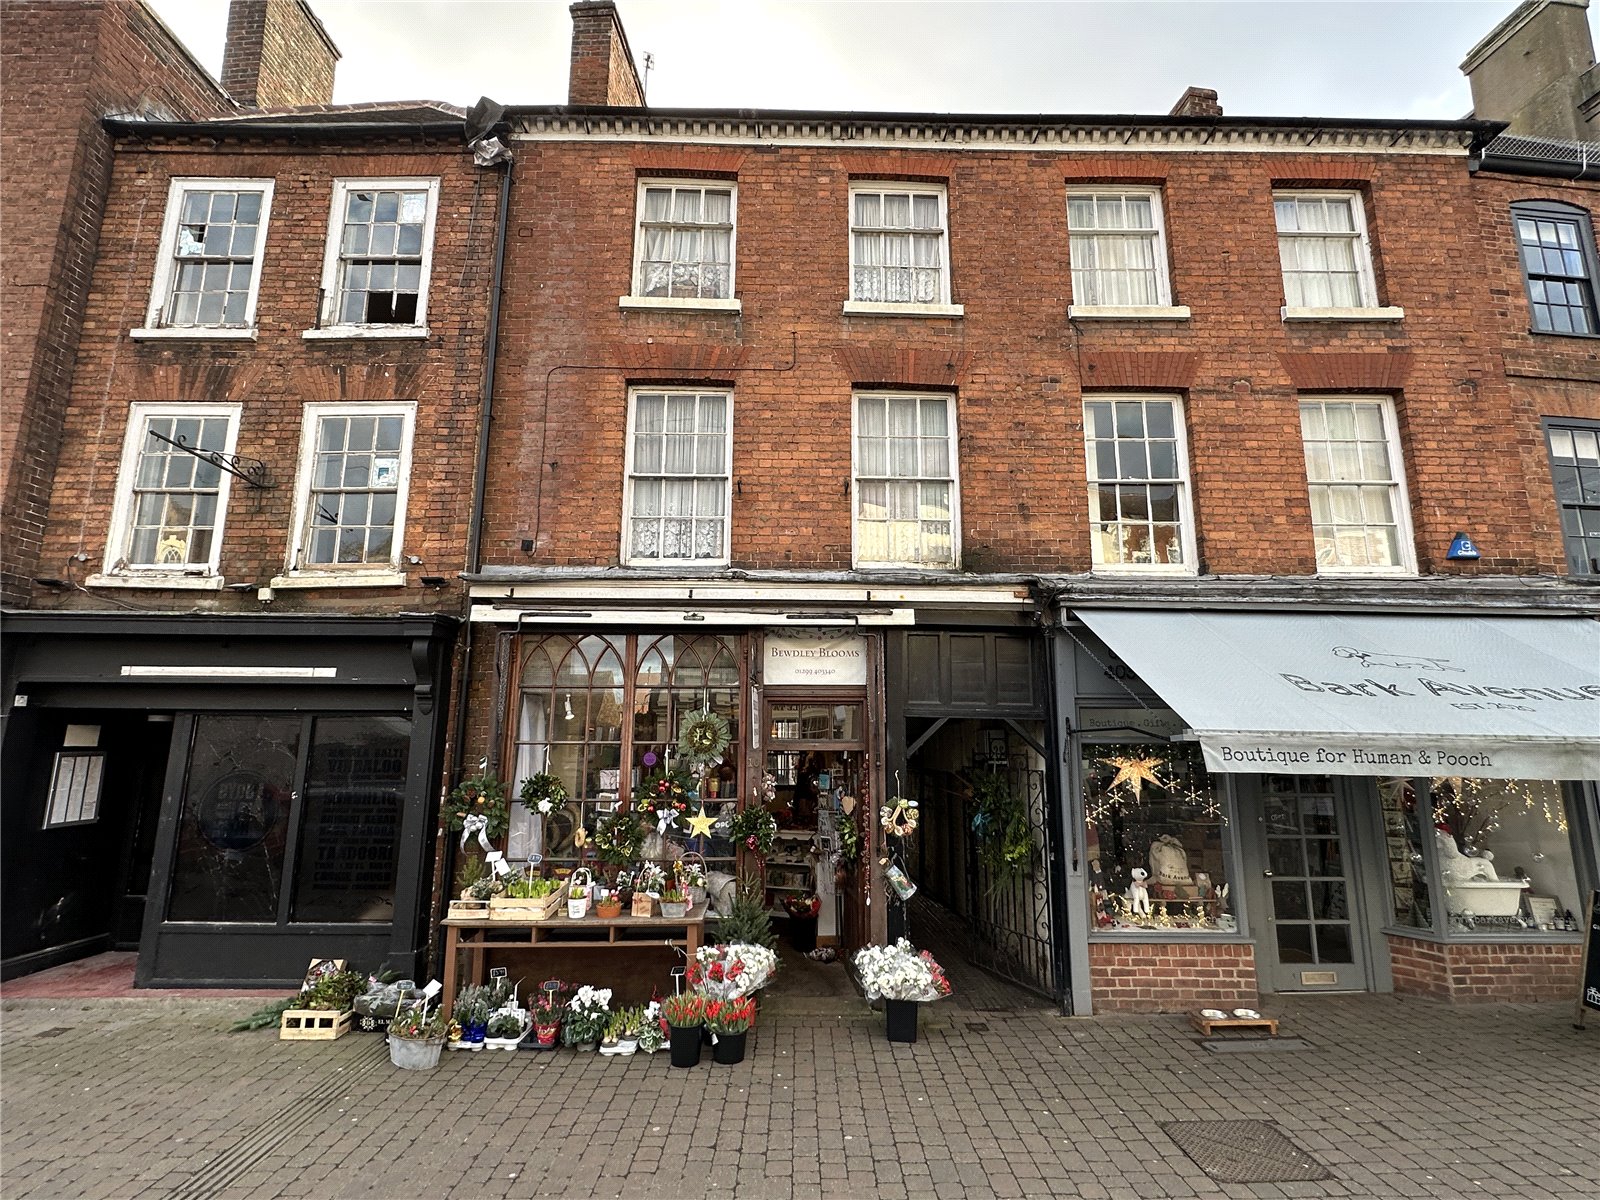 Load Street, Bewdley, Worcestershire, DY12